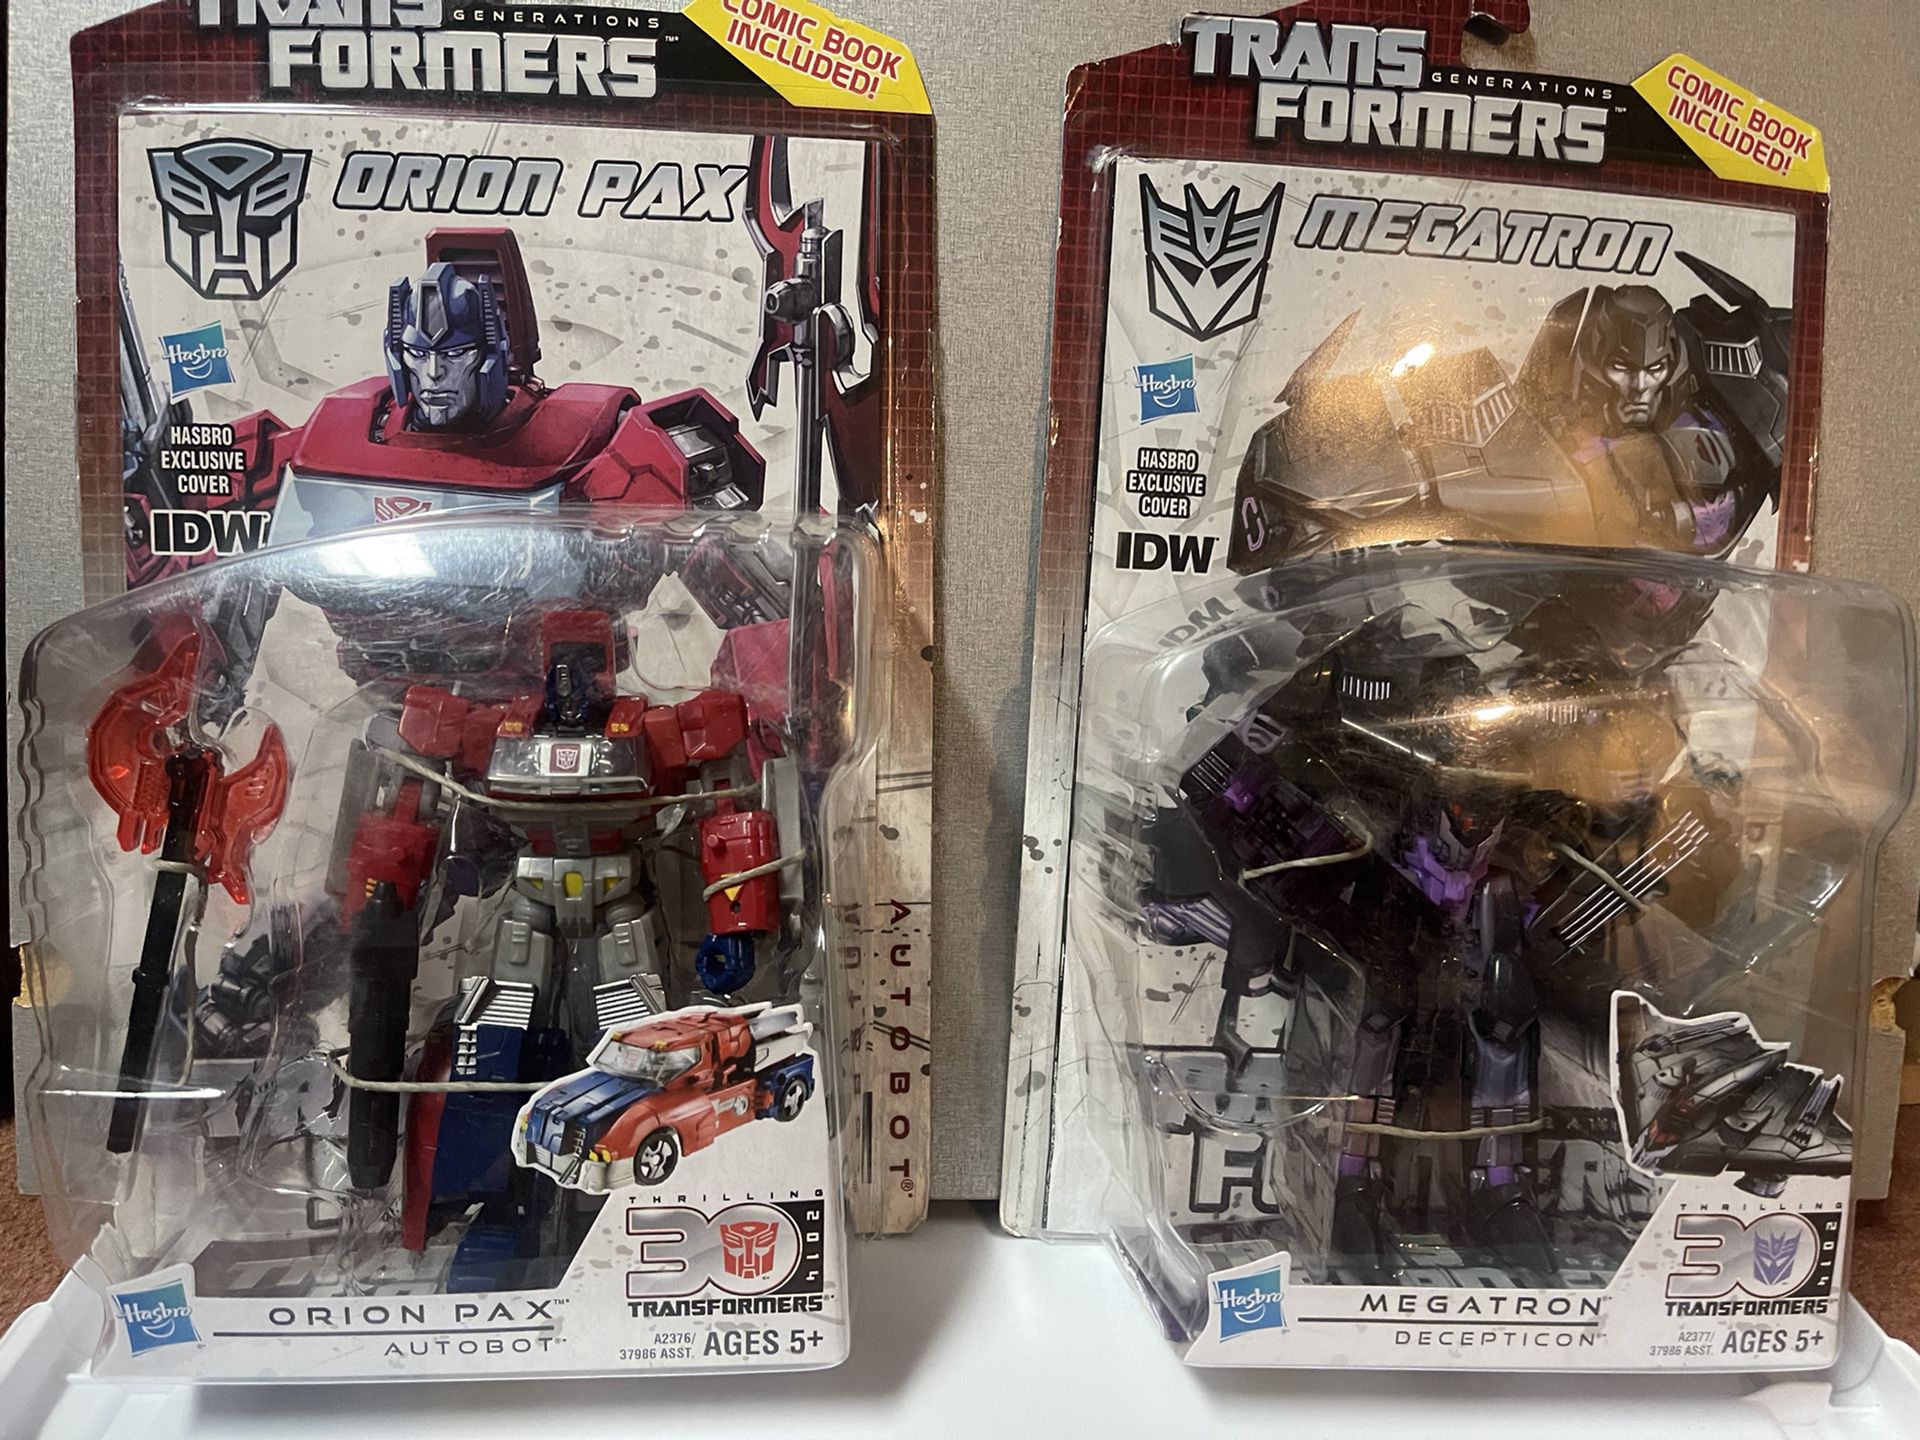 Transformers Generations Action Figures